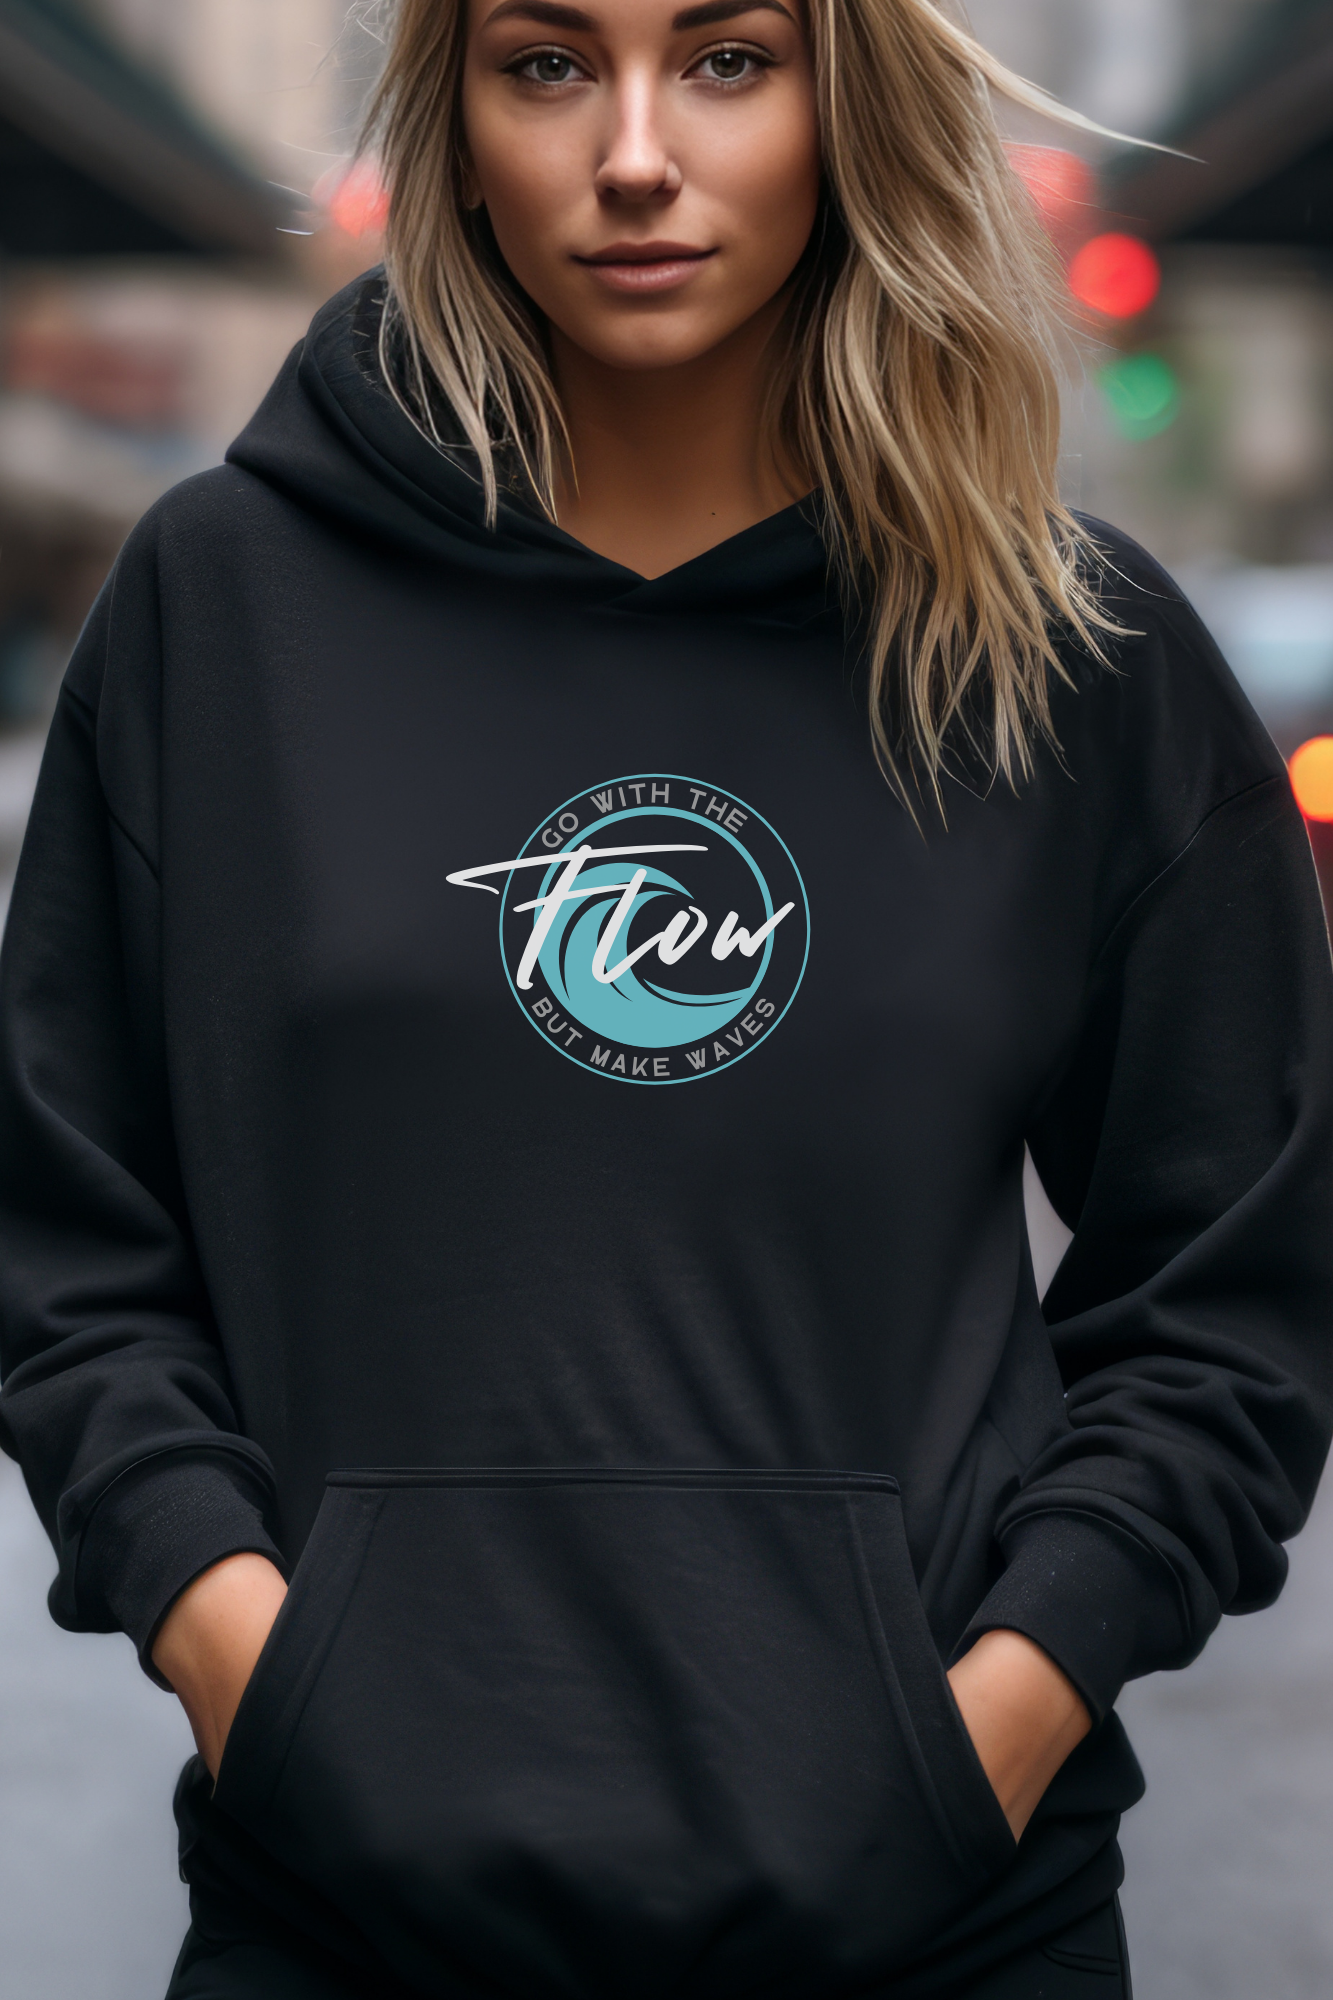 Celebrate Sobriety Gifts has launched a line of unisex hoodies.